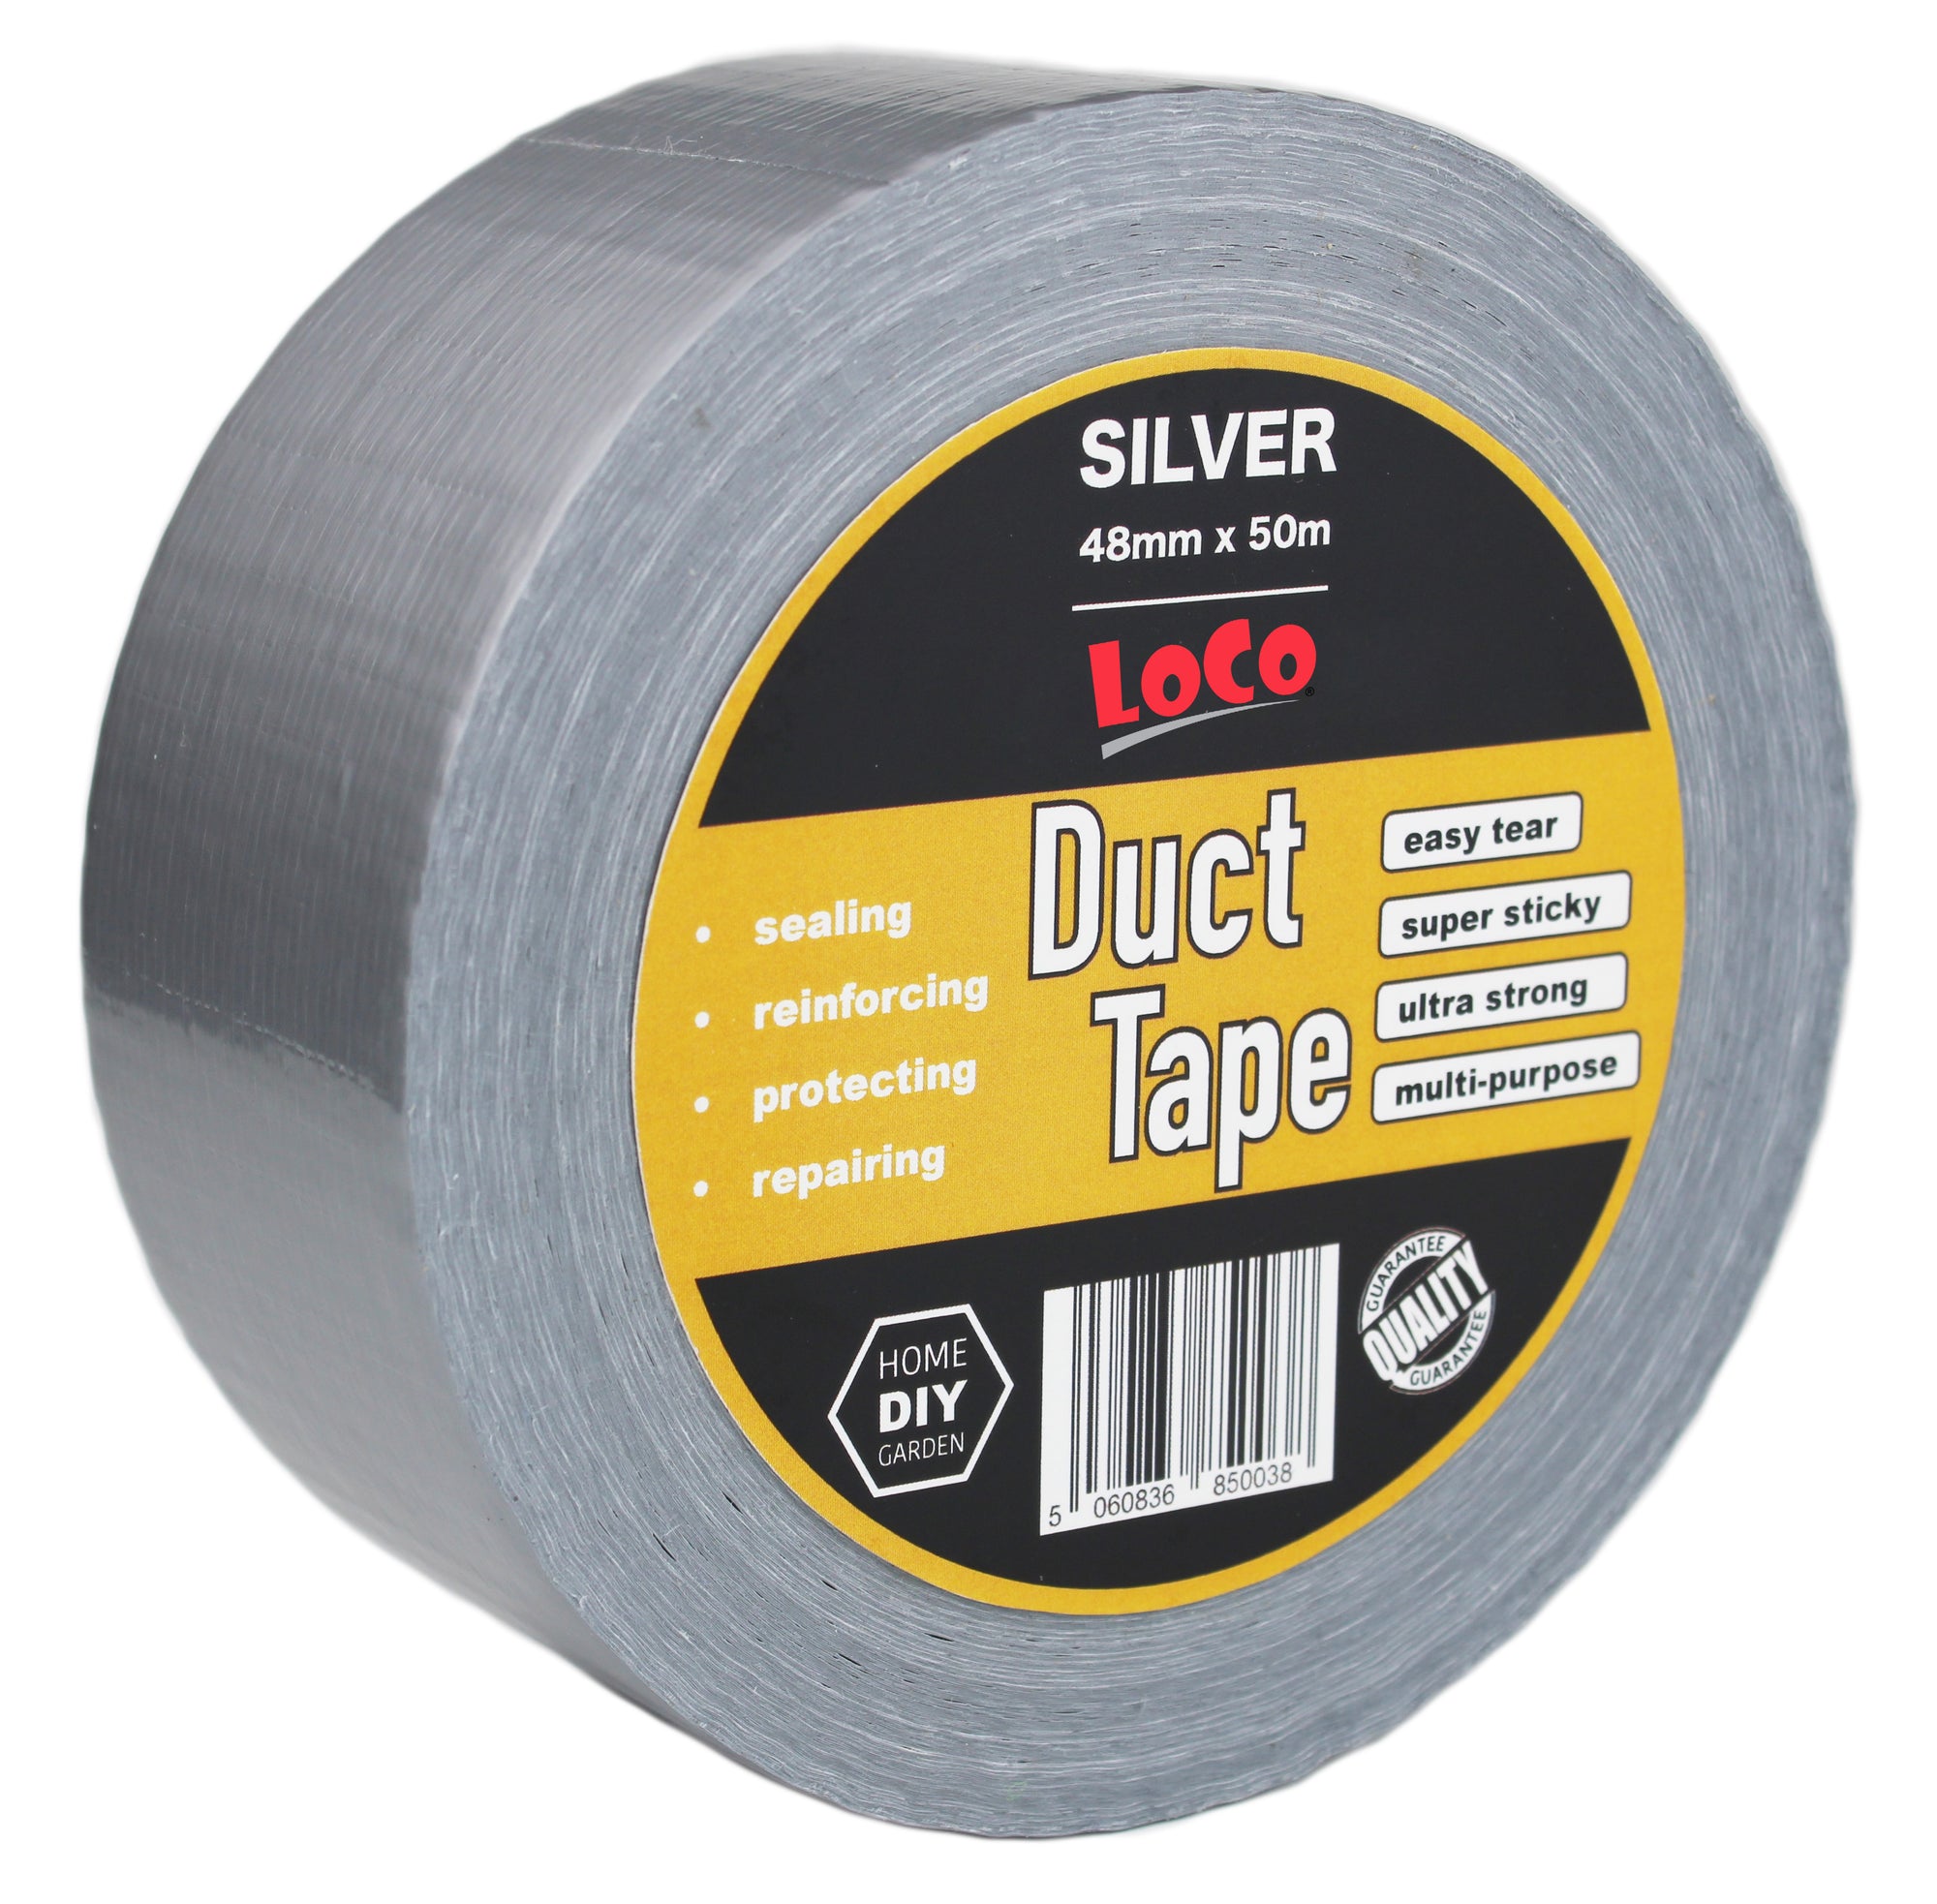 DUCT TAPE SILVER 48mm x 50m